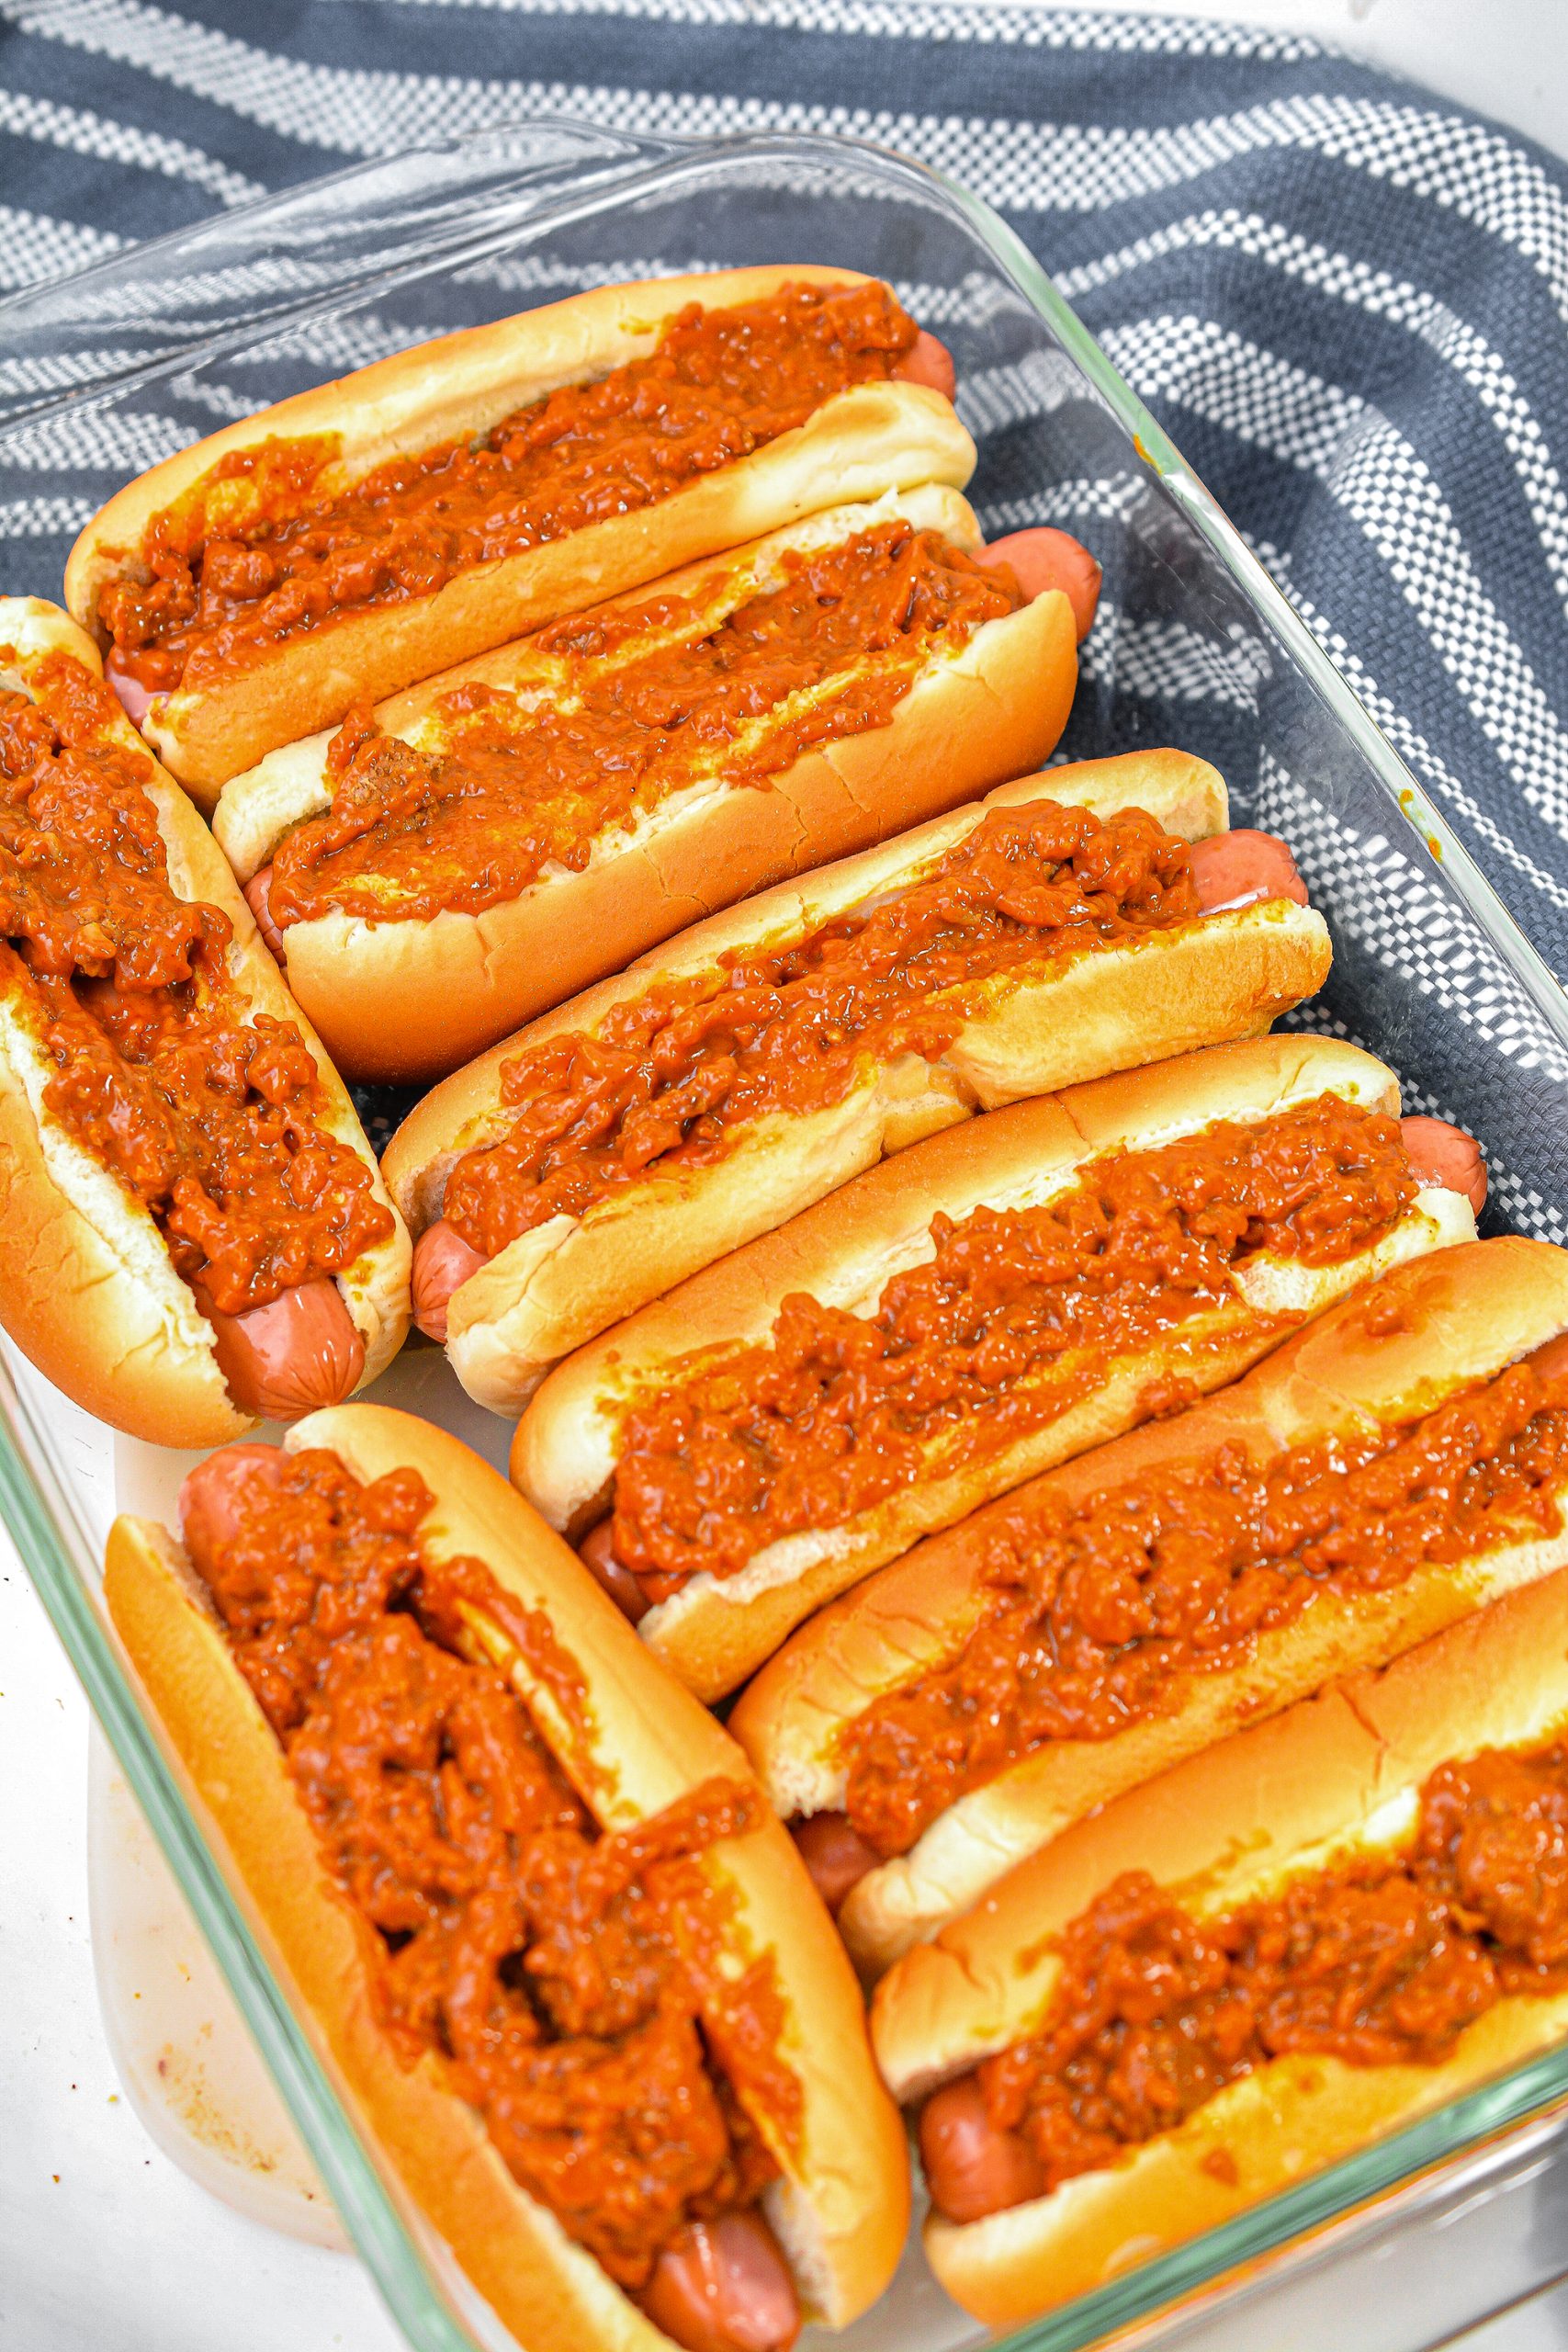 Top each hot dog with a serving of chili.